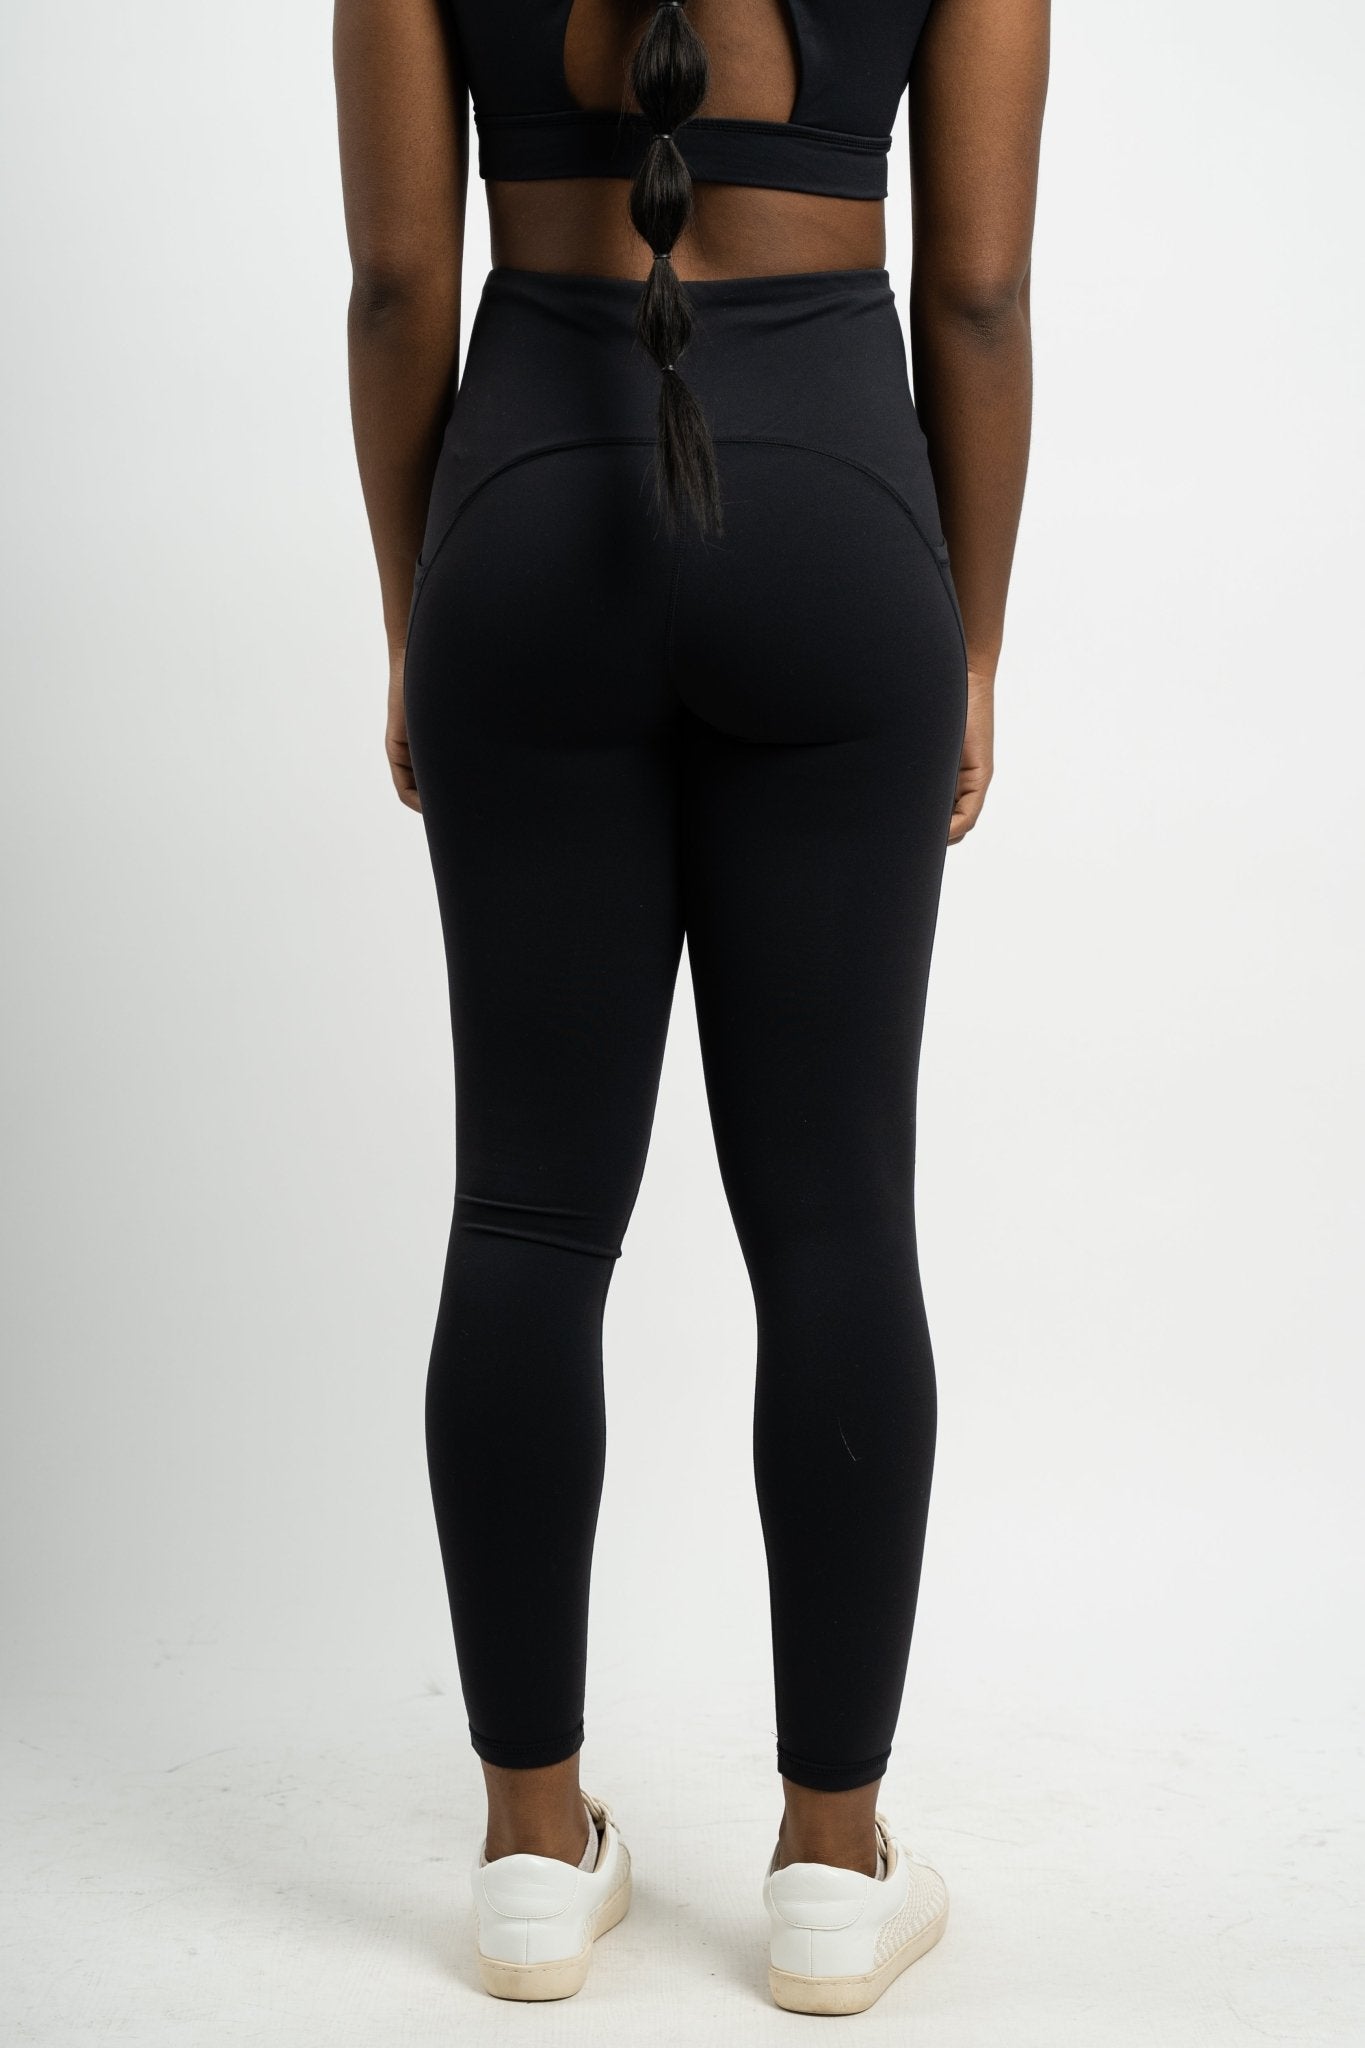 Lycra Tights, Shop The Largest Collection